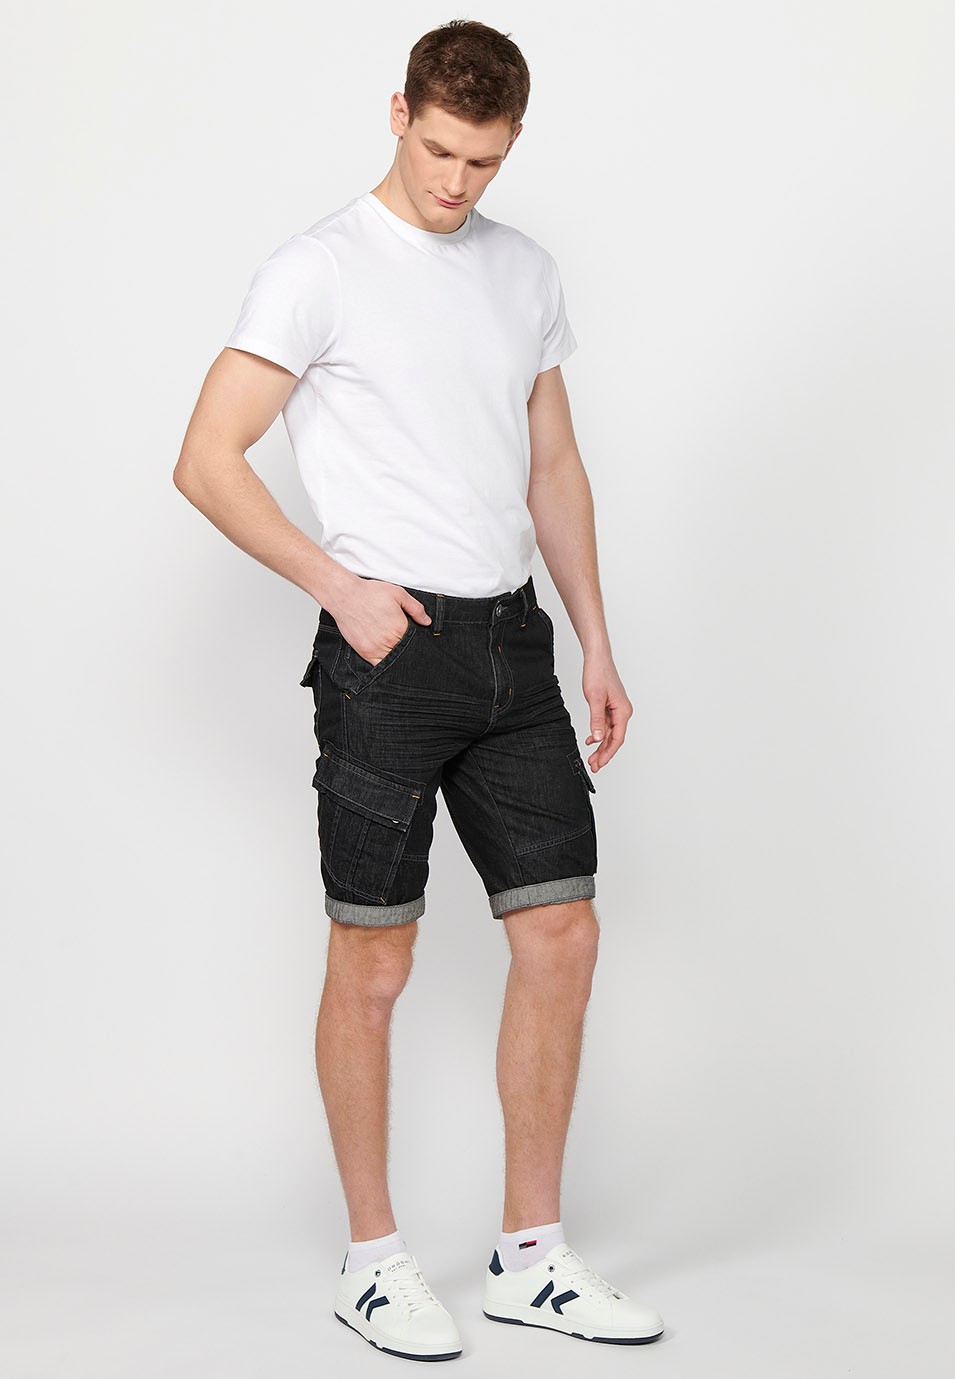 Denim Bermuda Shorts with Turn-Up Finish and Front Zipper and Button Closure with Pockets, One Ticket Pocket and Two Side Pockets in Black for Men